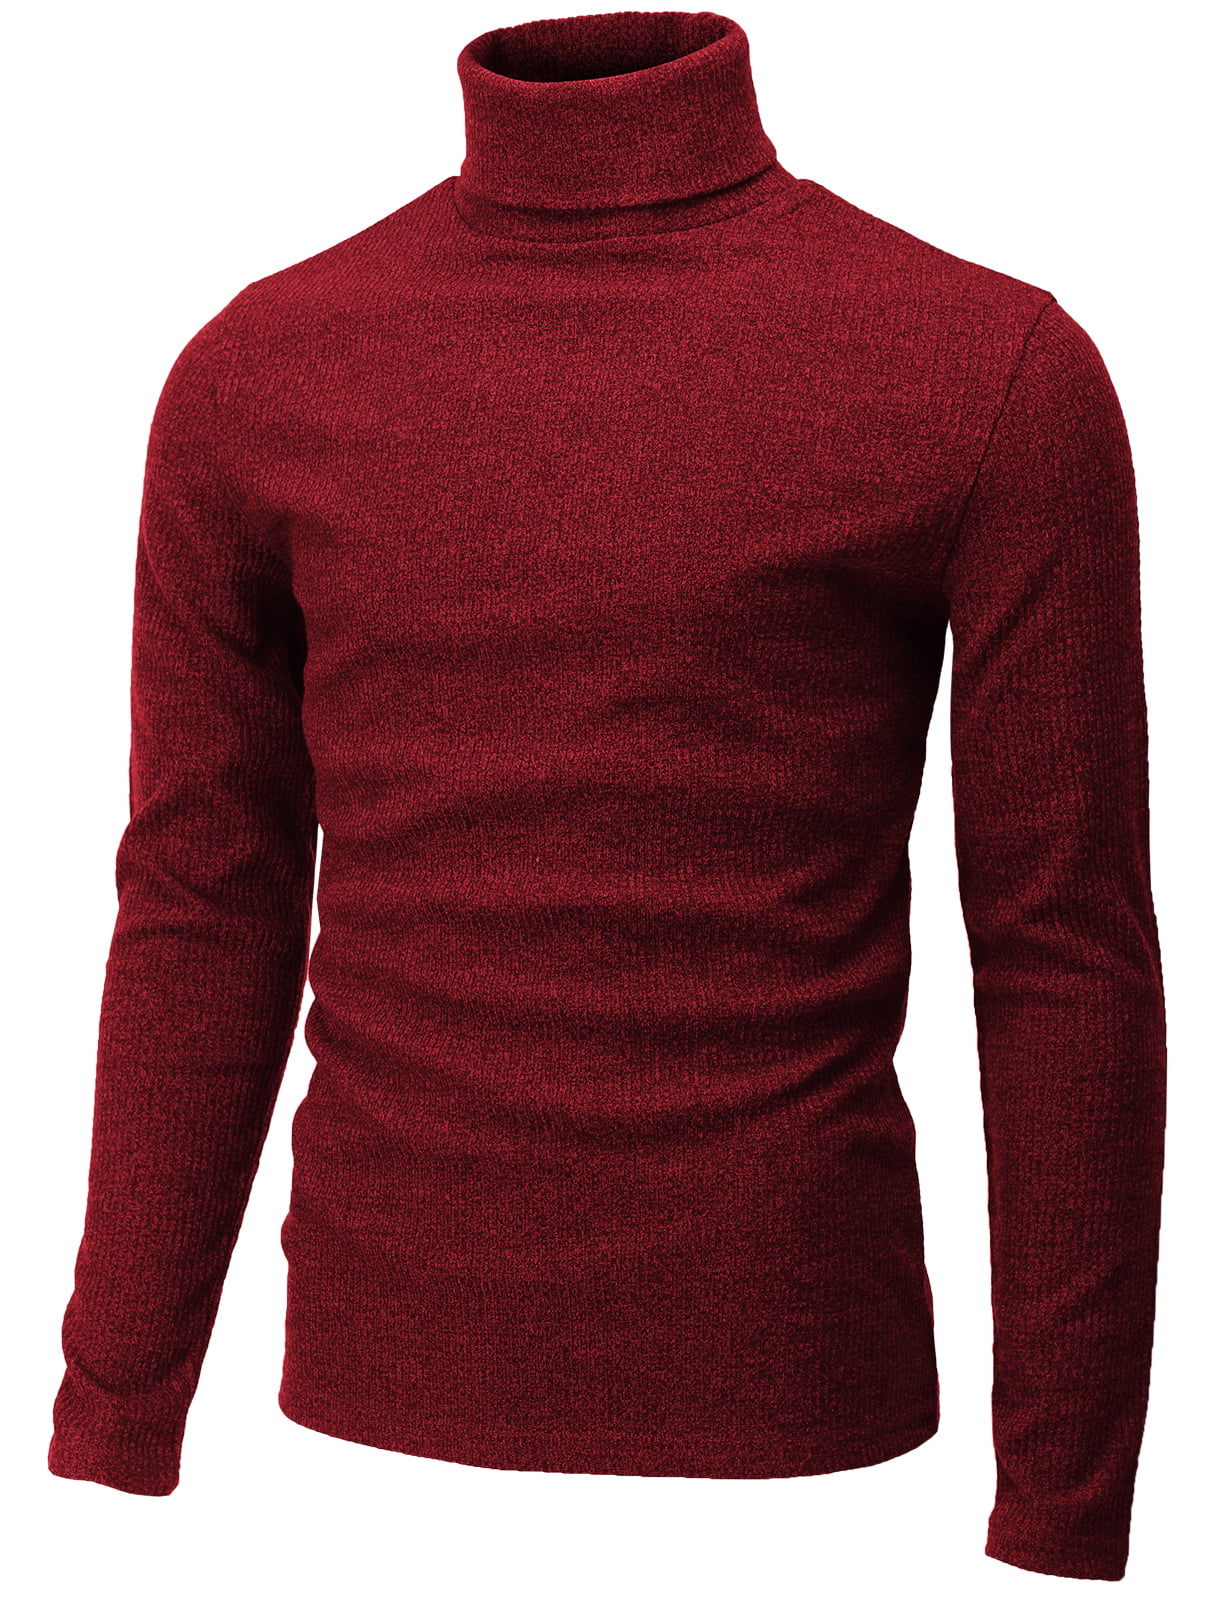 H2h Mens Slim Fit Turtleneck Pullover Rib Fabric Sweaters Basic Tops